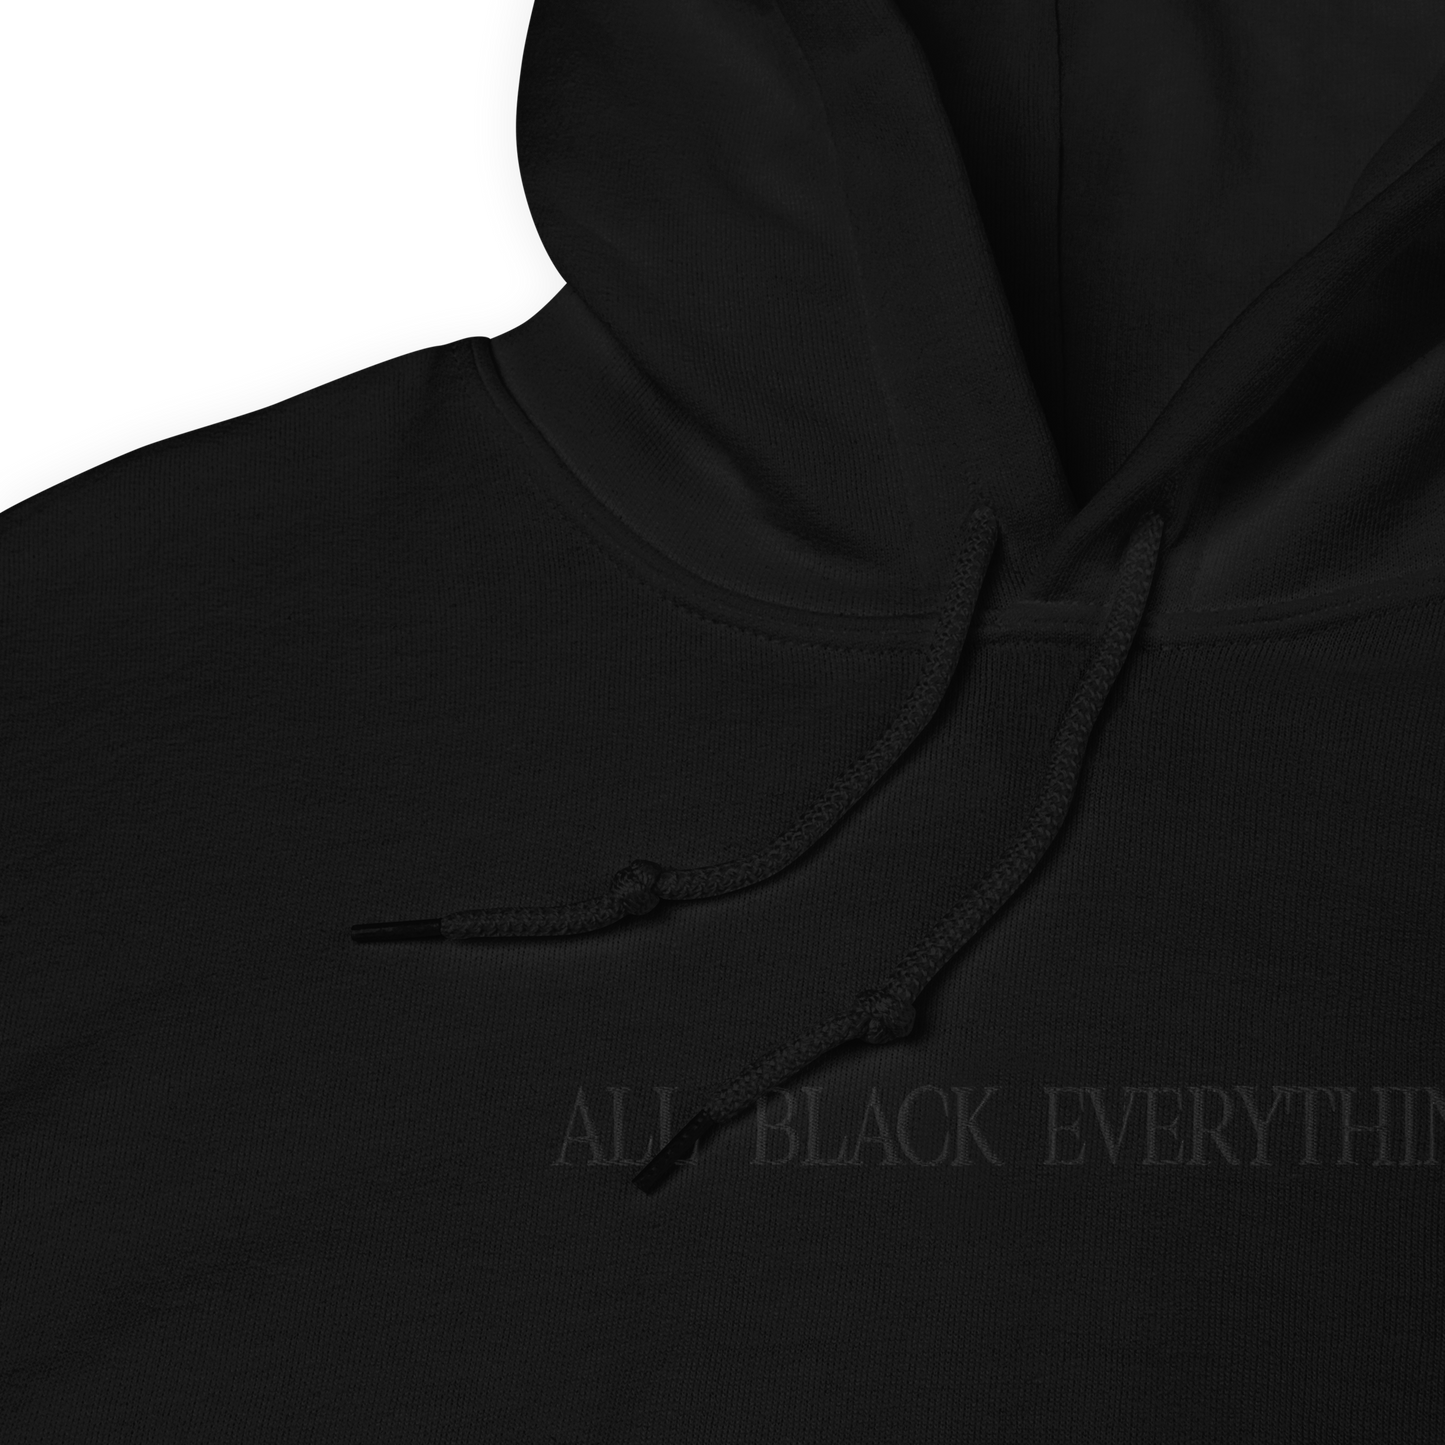 All Black Everything Embroidered Hoodie